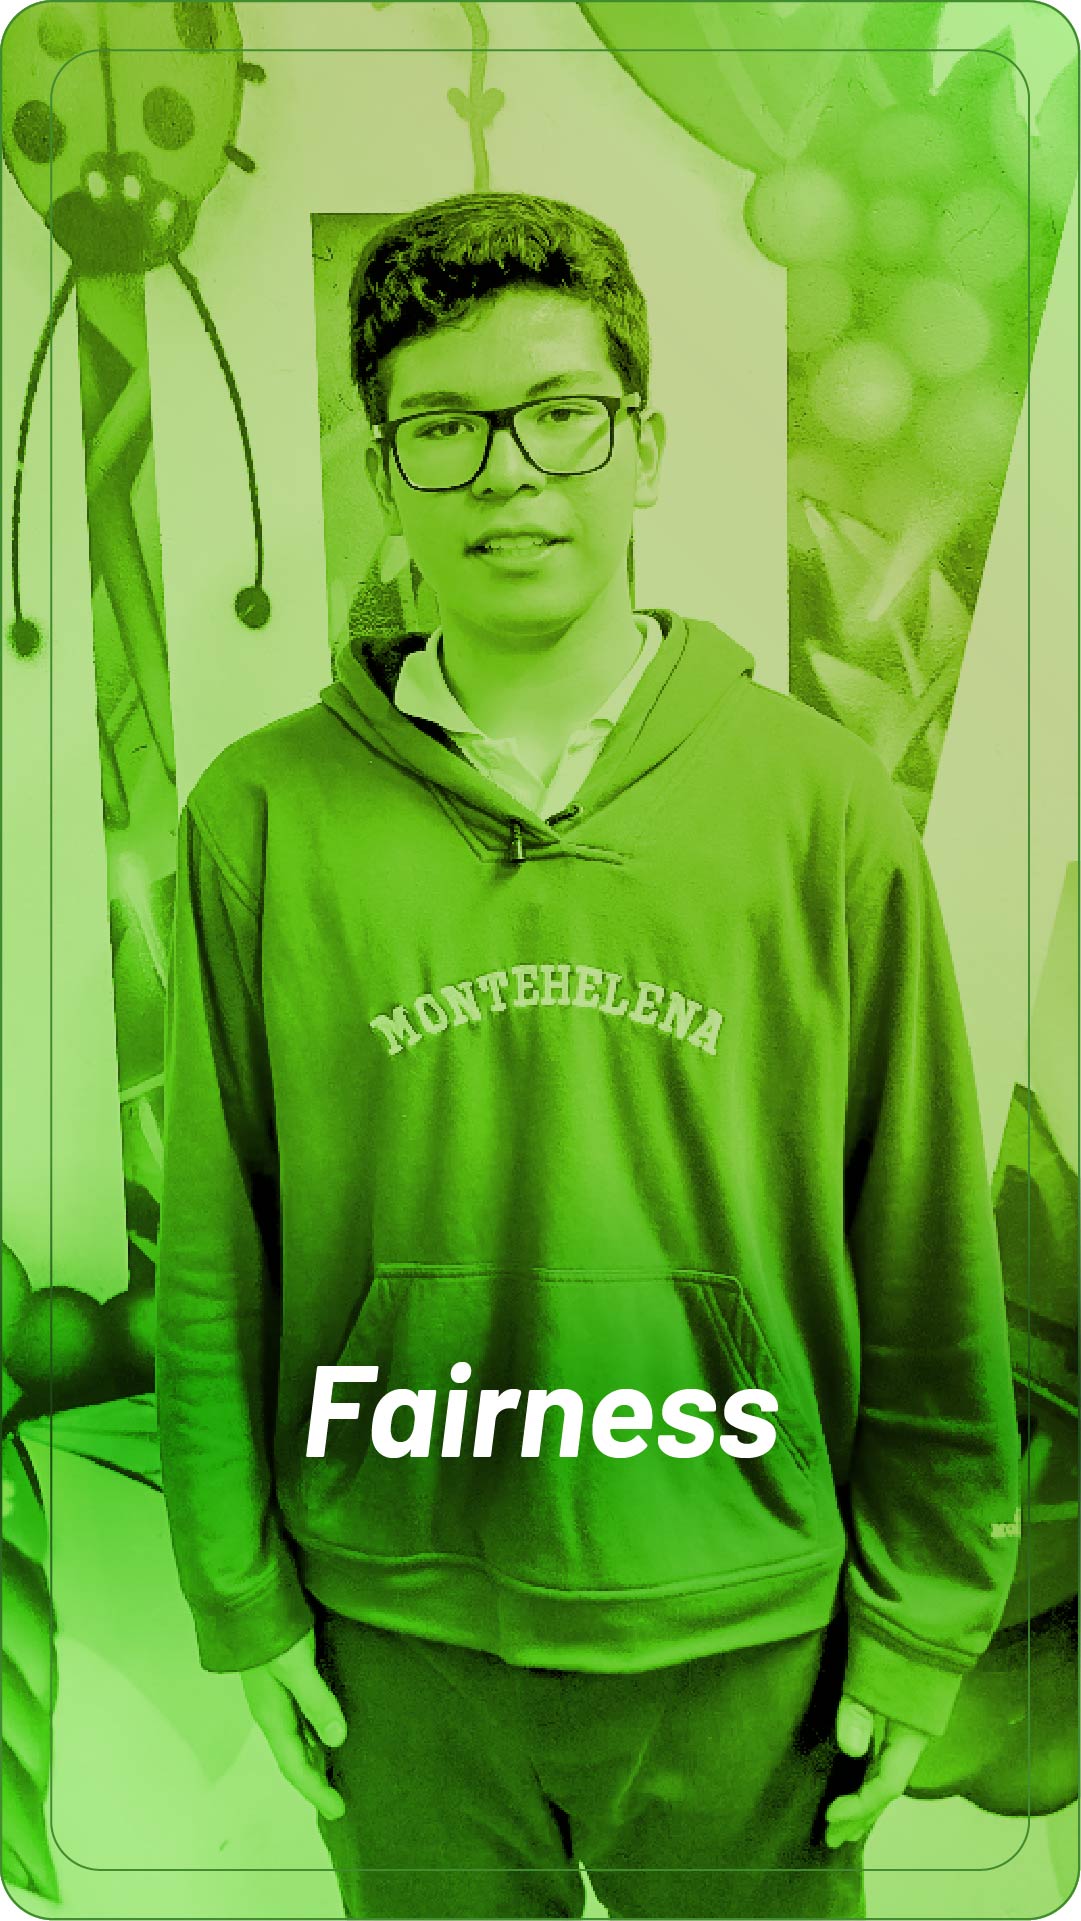 Character Counts_Fairness